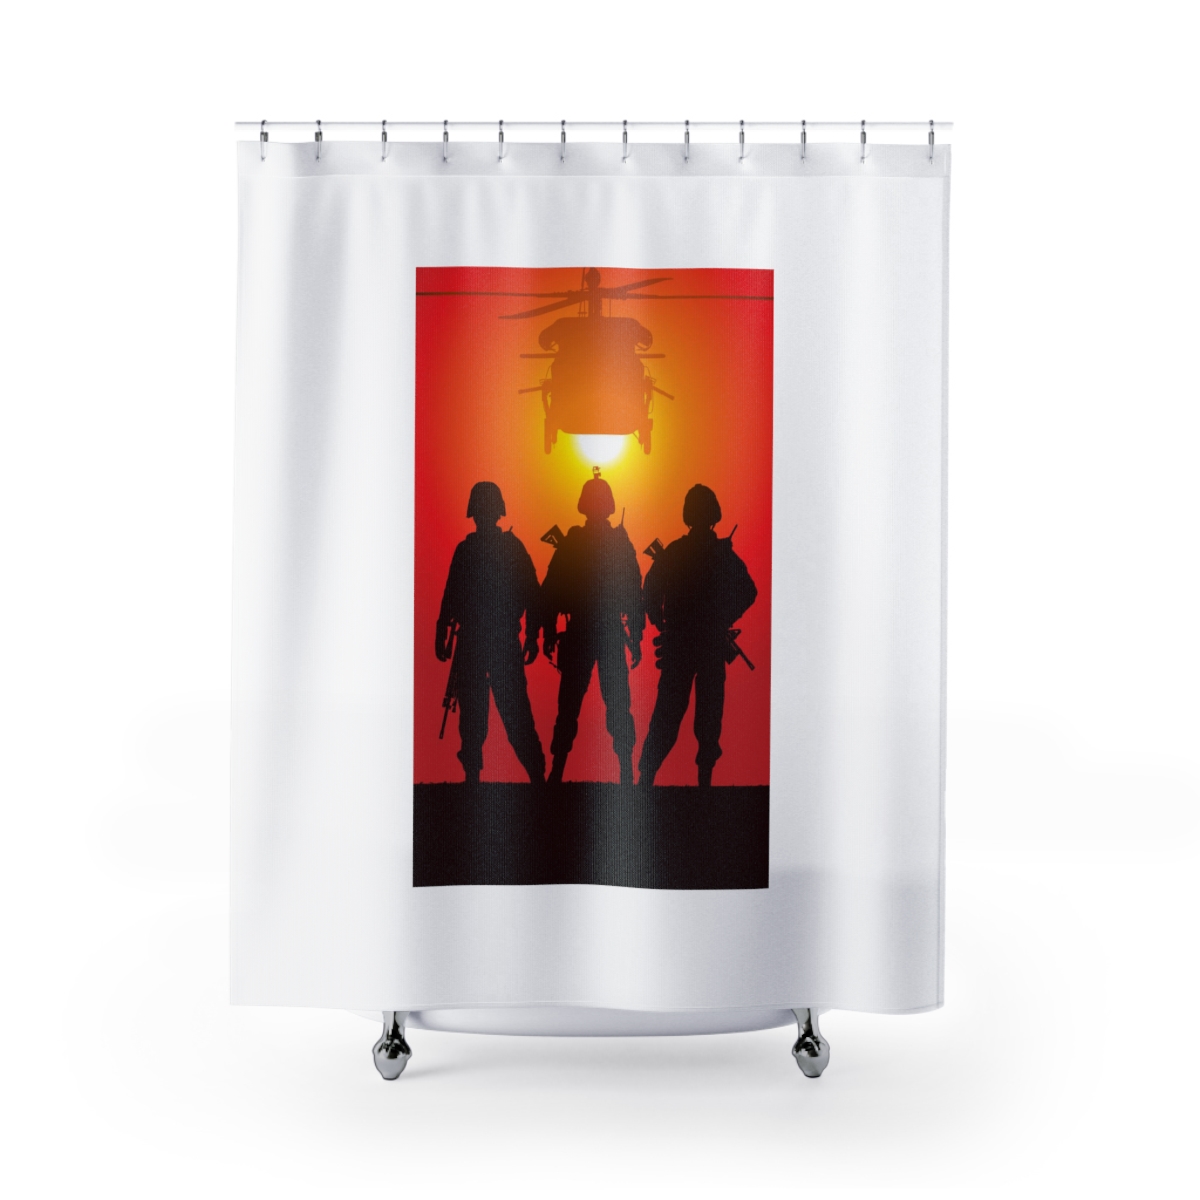 Shower Curtain Soldiers Thank You product thumbnail image